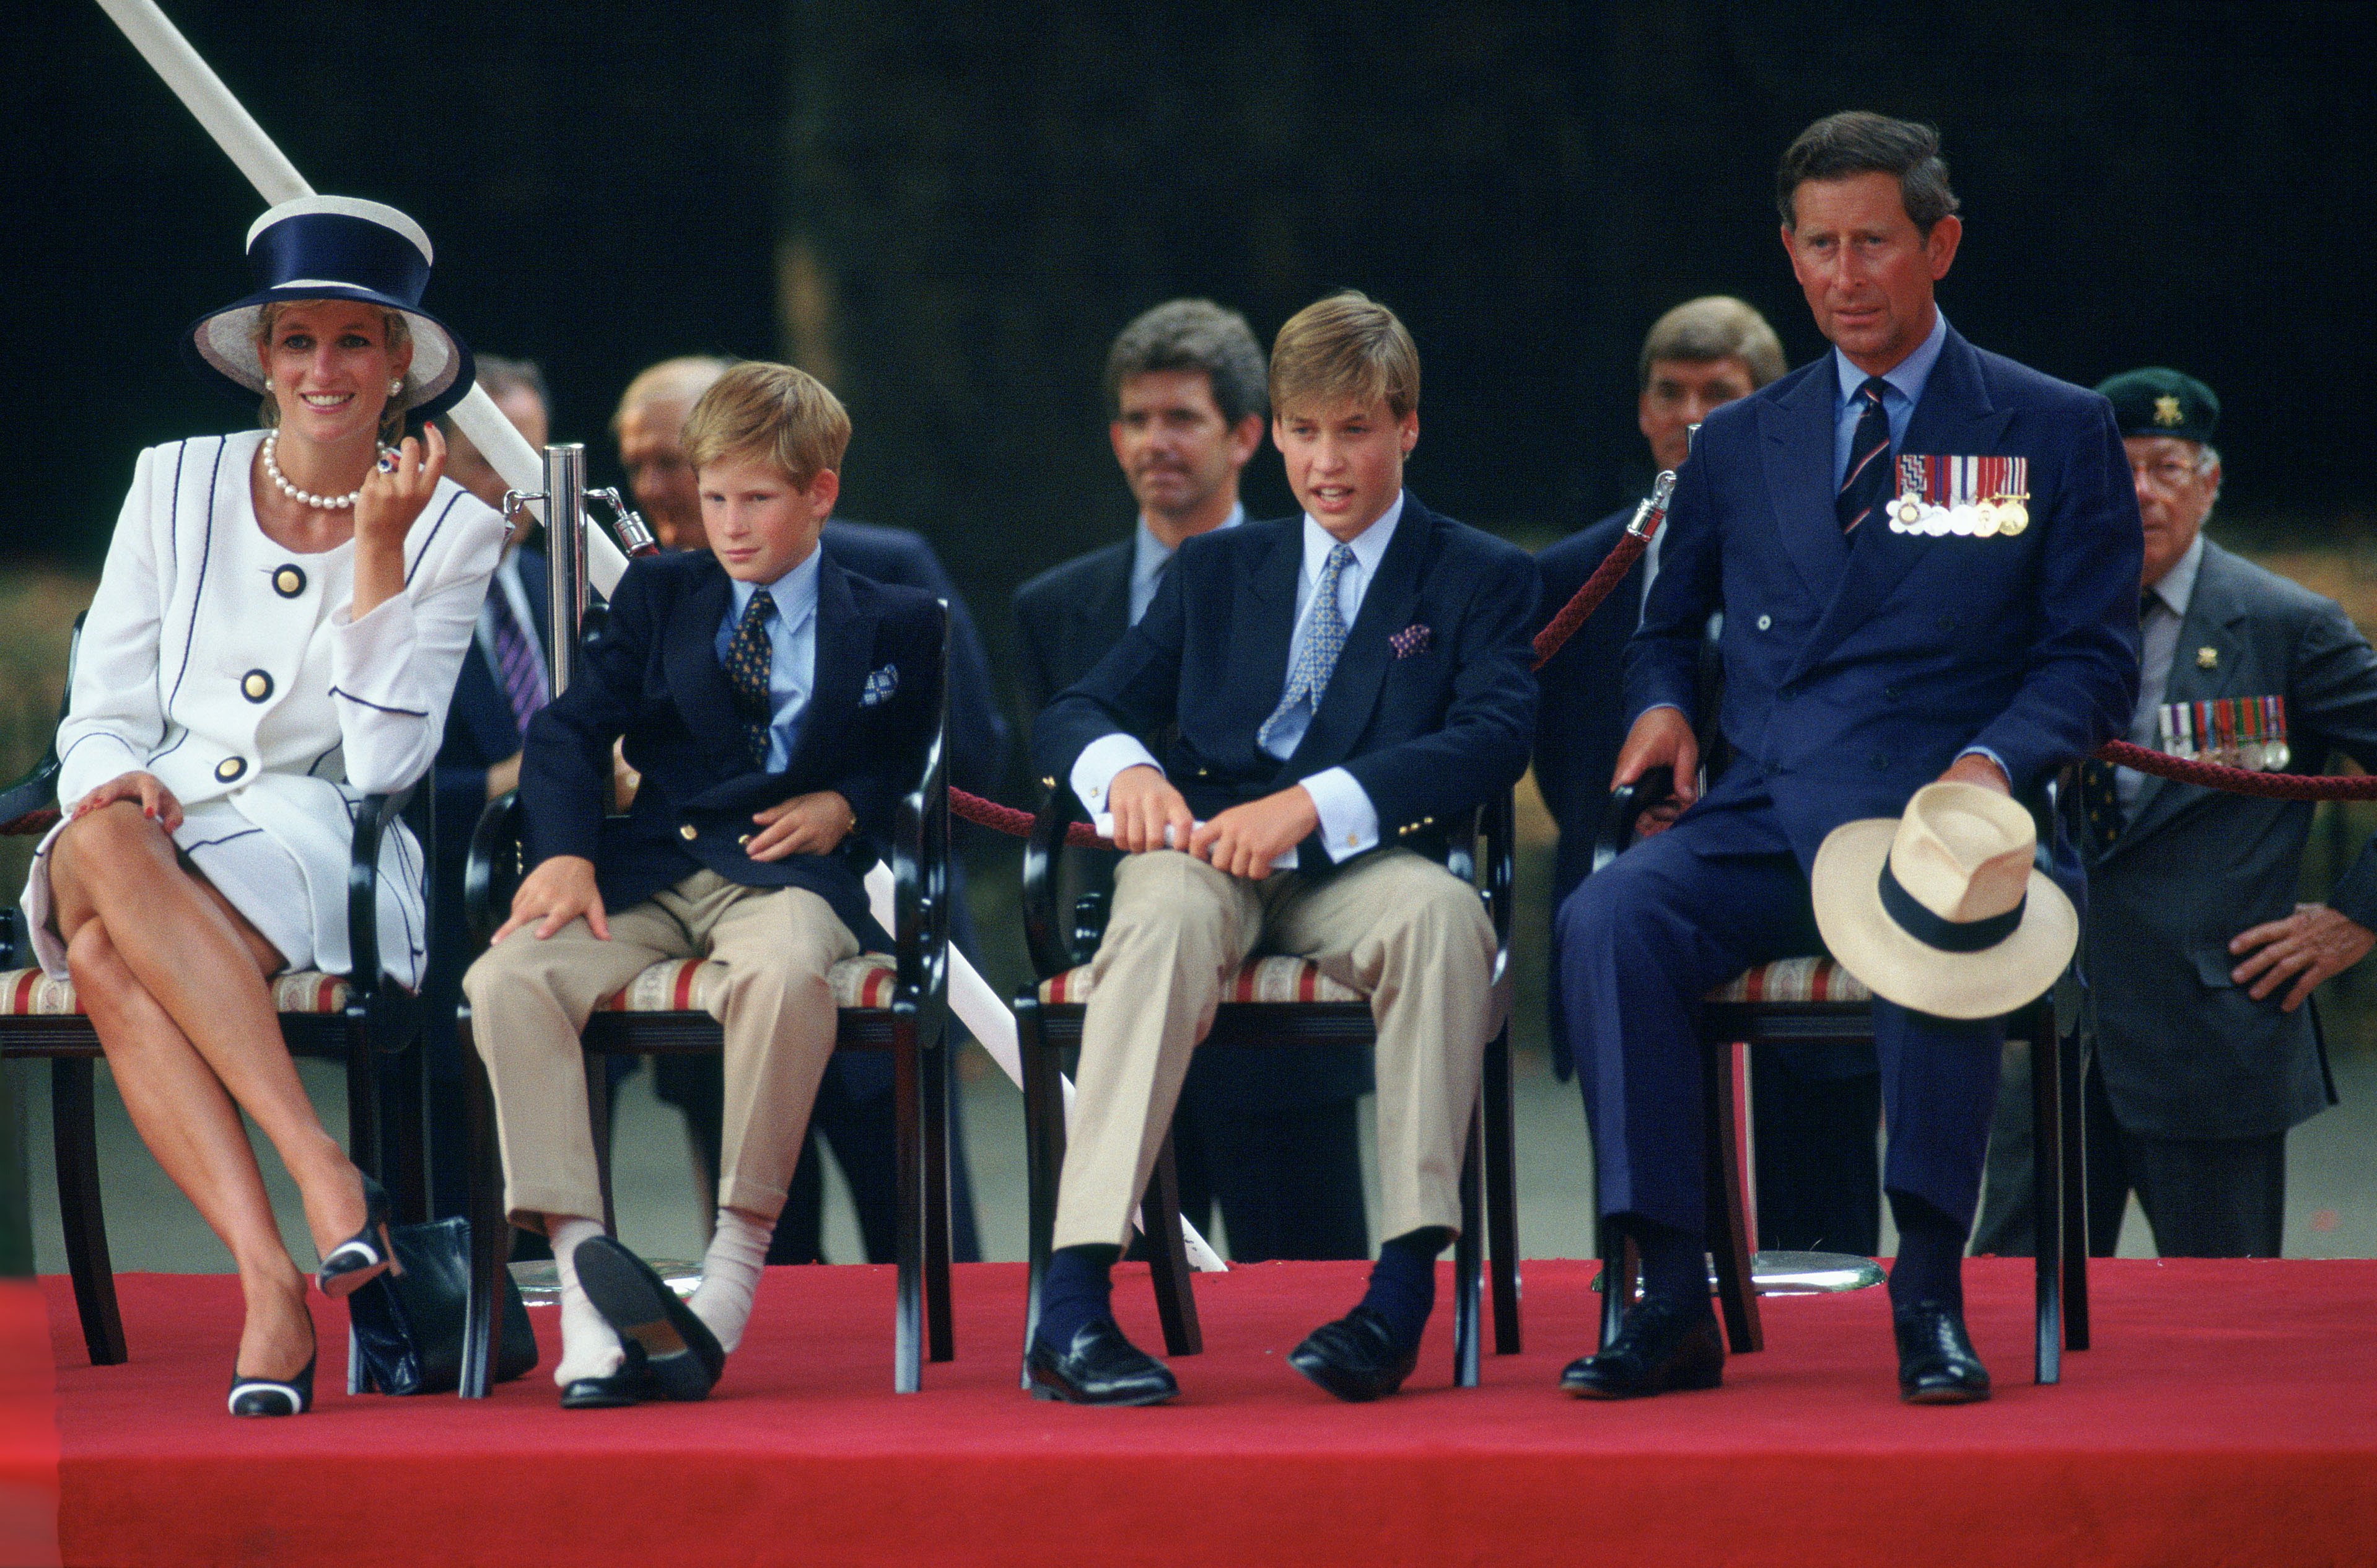 Prince Harry Has Kicked Off His Shoes Whilst Watching The Vj Day 50th Anniversary Parade. He Is Sitting With His Family - Diana, Princess Of Wales, Prince Charles And Prince William. | Source: Getty Images